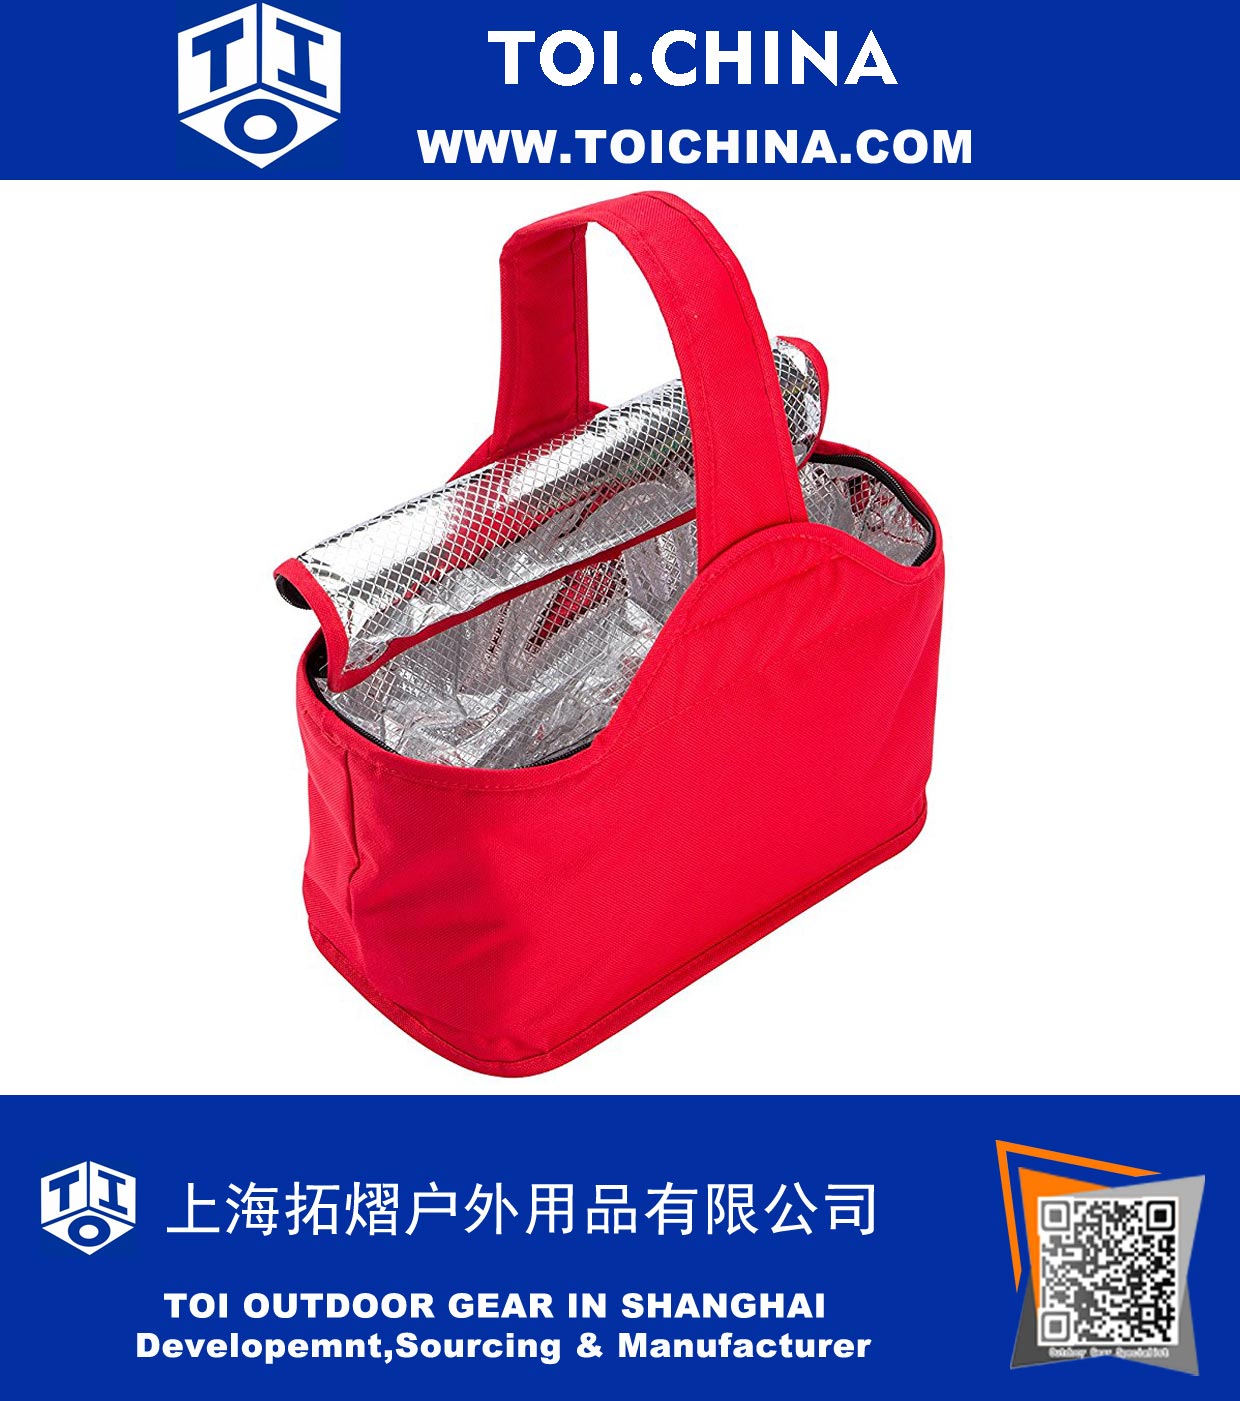 Insulated Picnic Lunch Bag